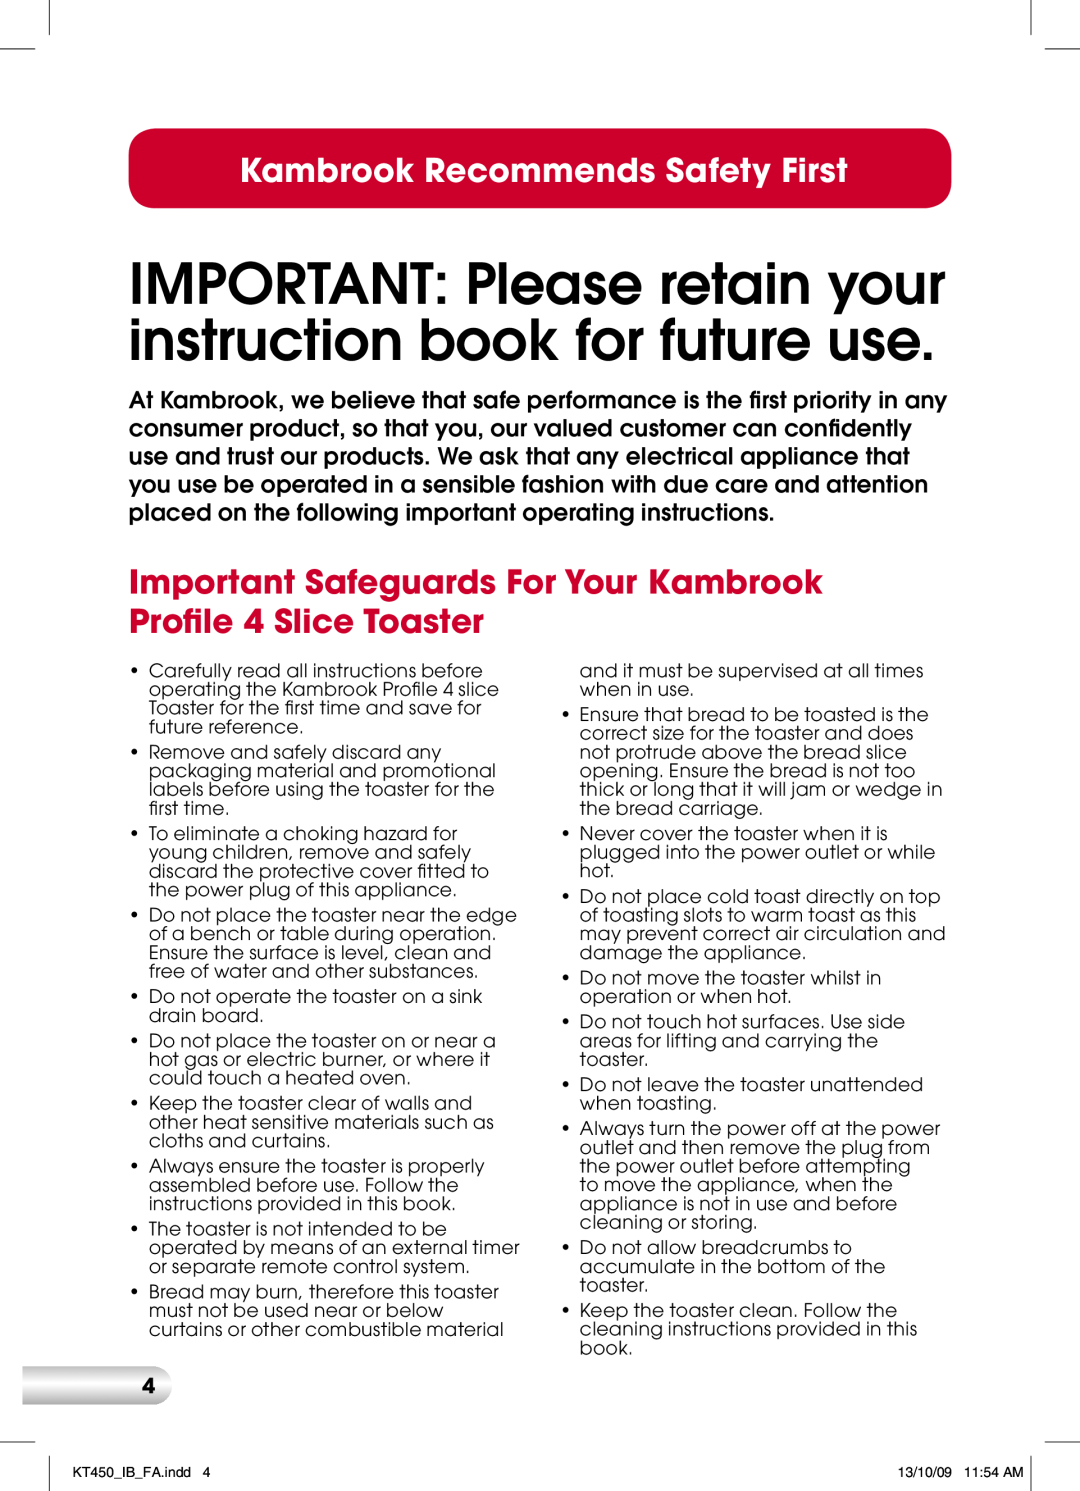 Kambrook KT450 manual Kambrook Recommends Safety First 